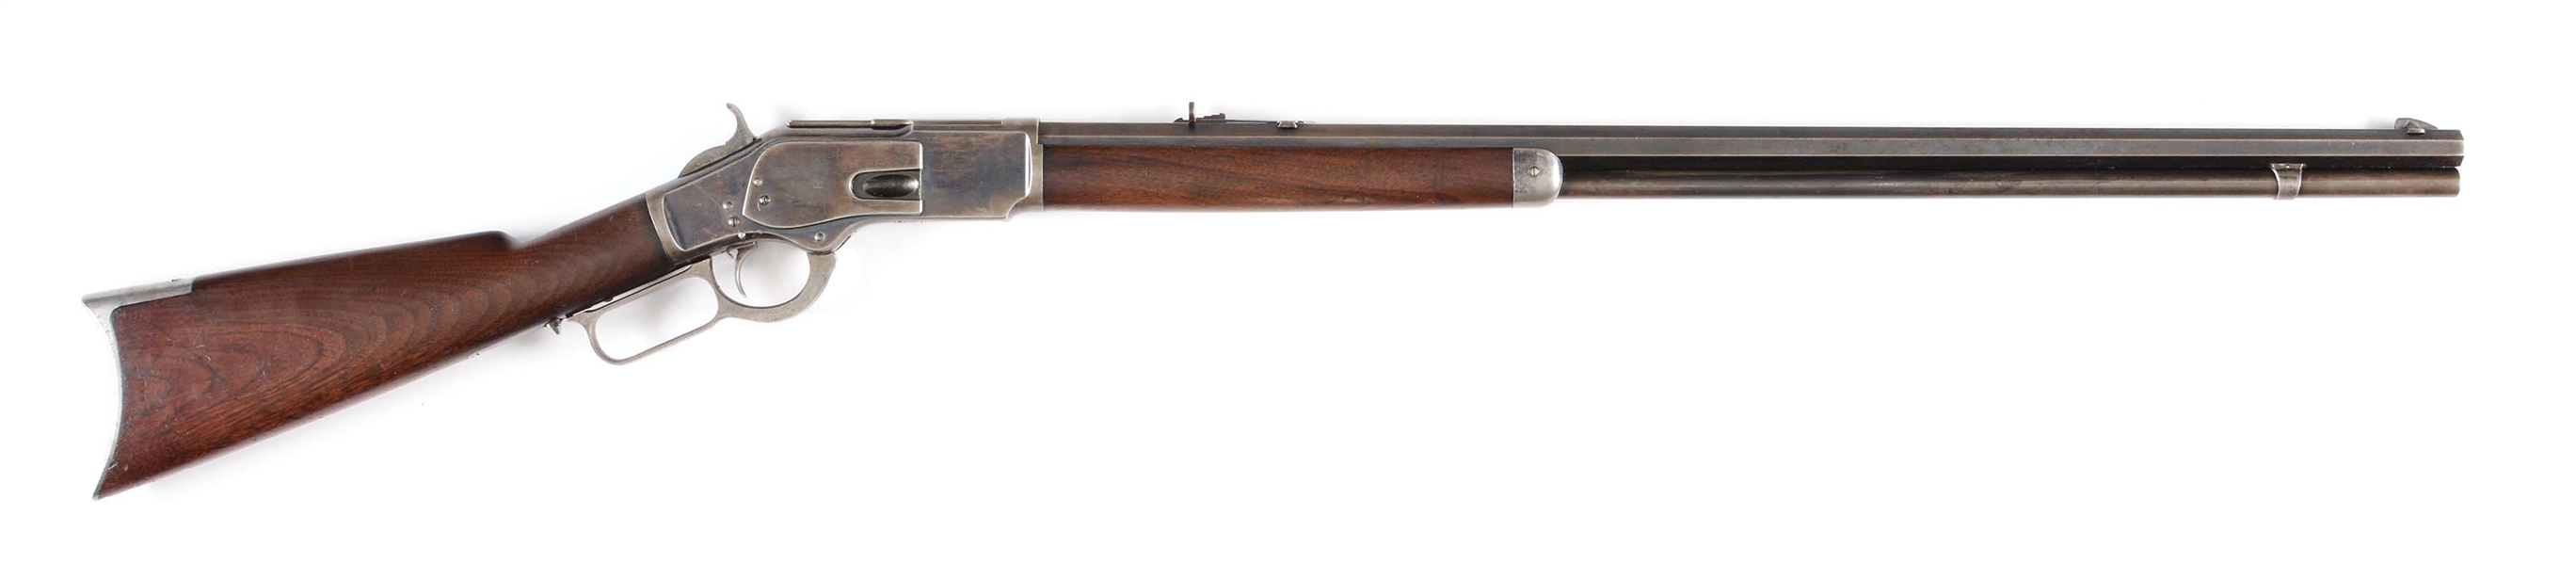 (A) SECOND MODEL WINCHESTER 1873 .44-40 LEVER ACTION RIFLE WITH 30" BARREL.